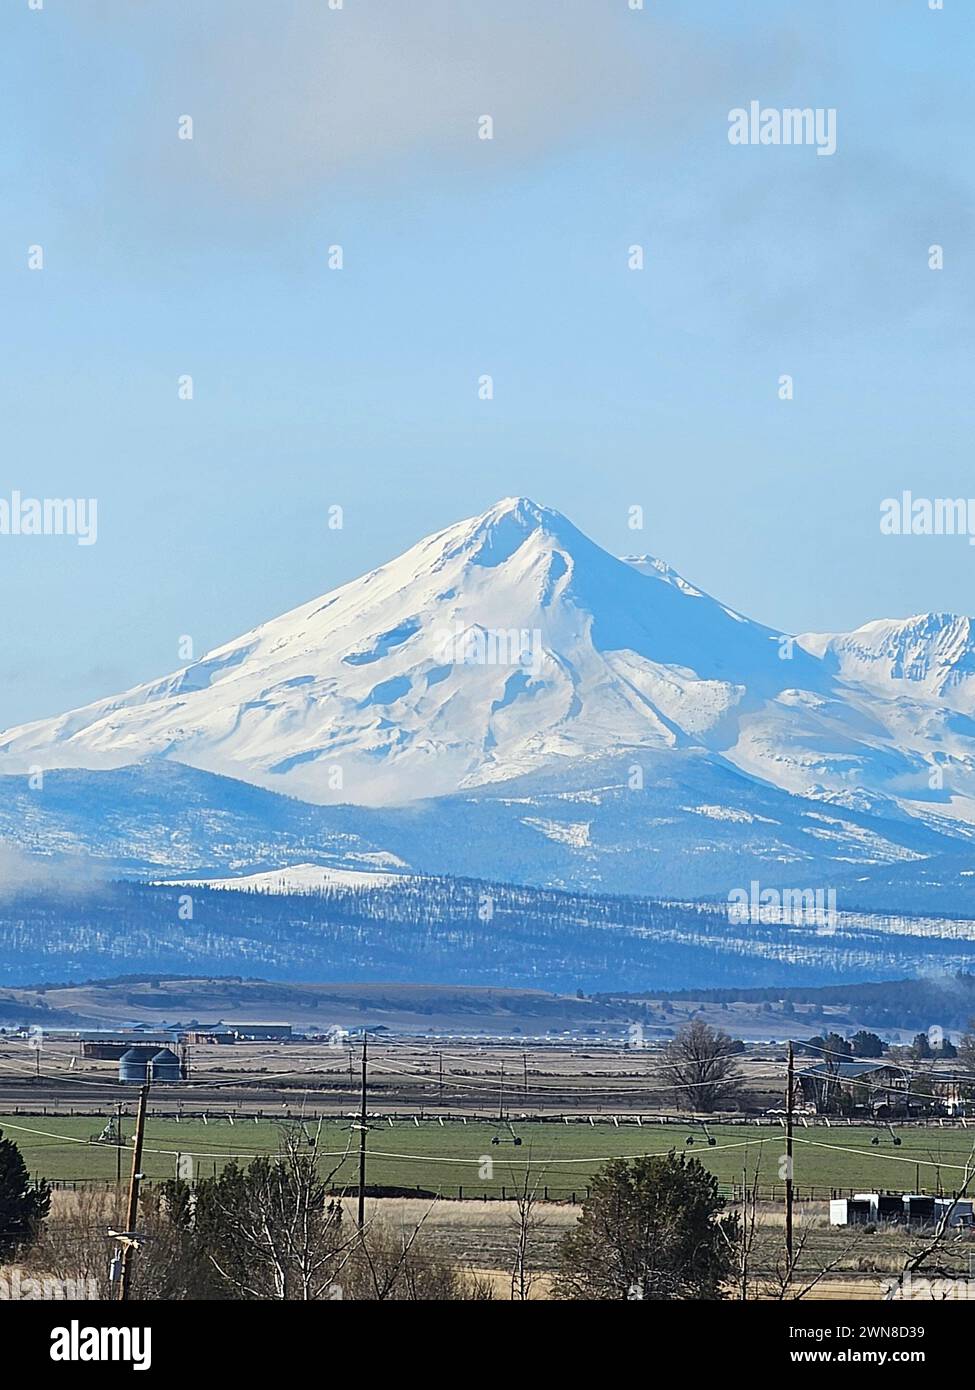 The massive snowy Mount Shasta towering over houses in a field Stock Photo